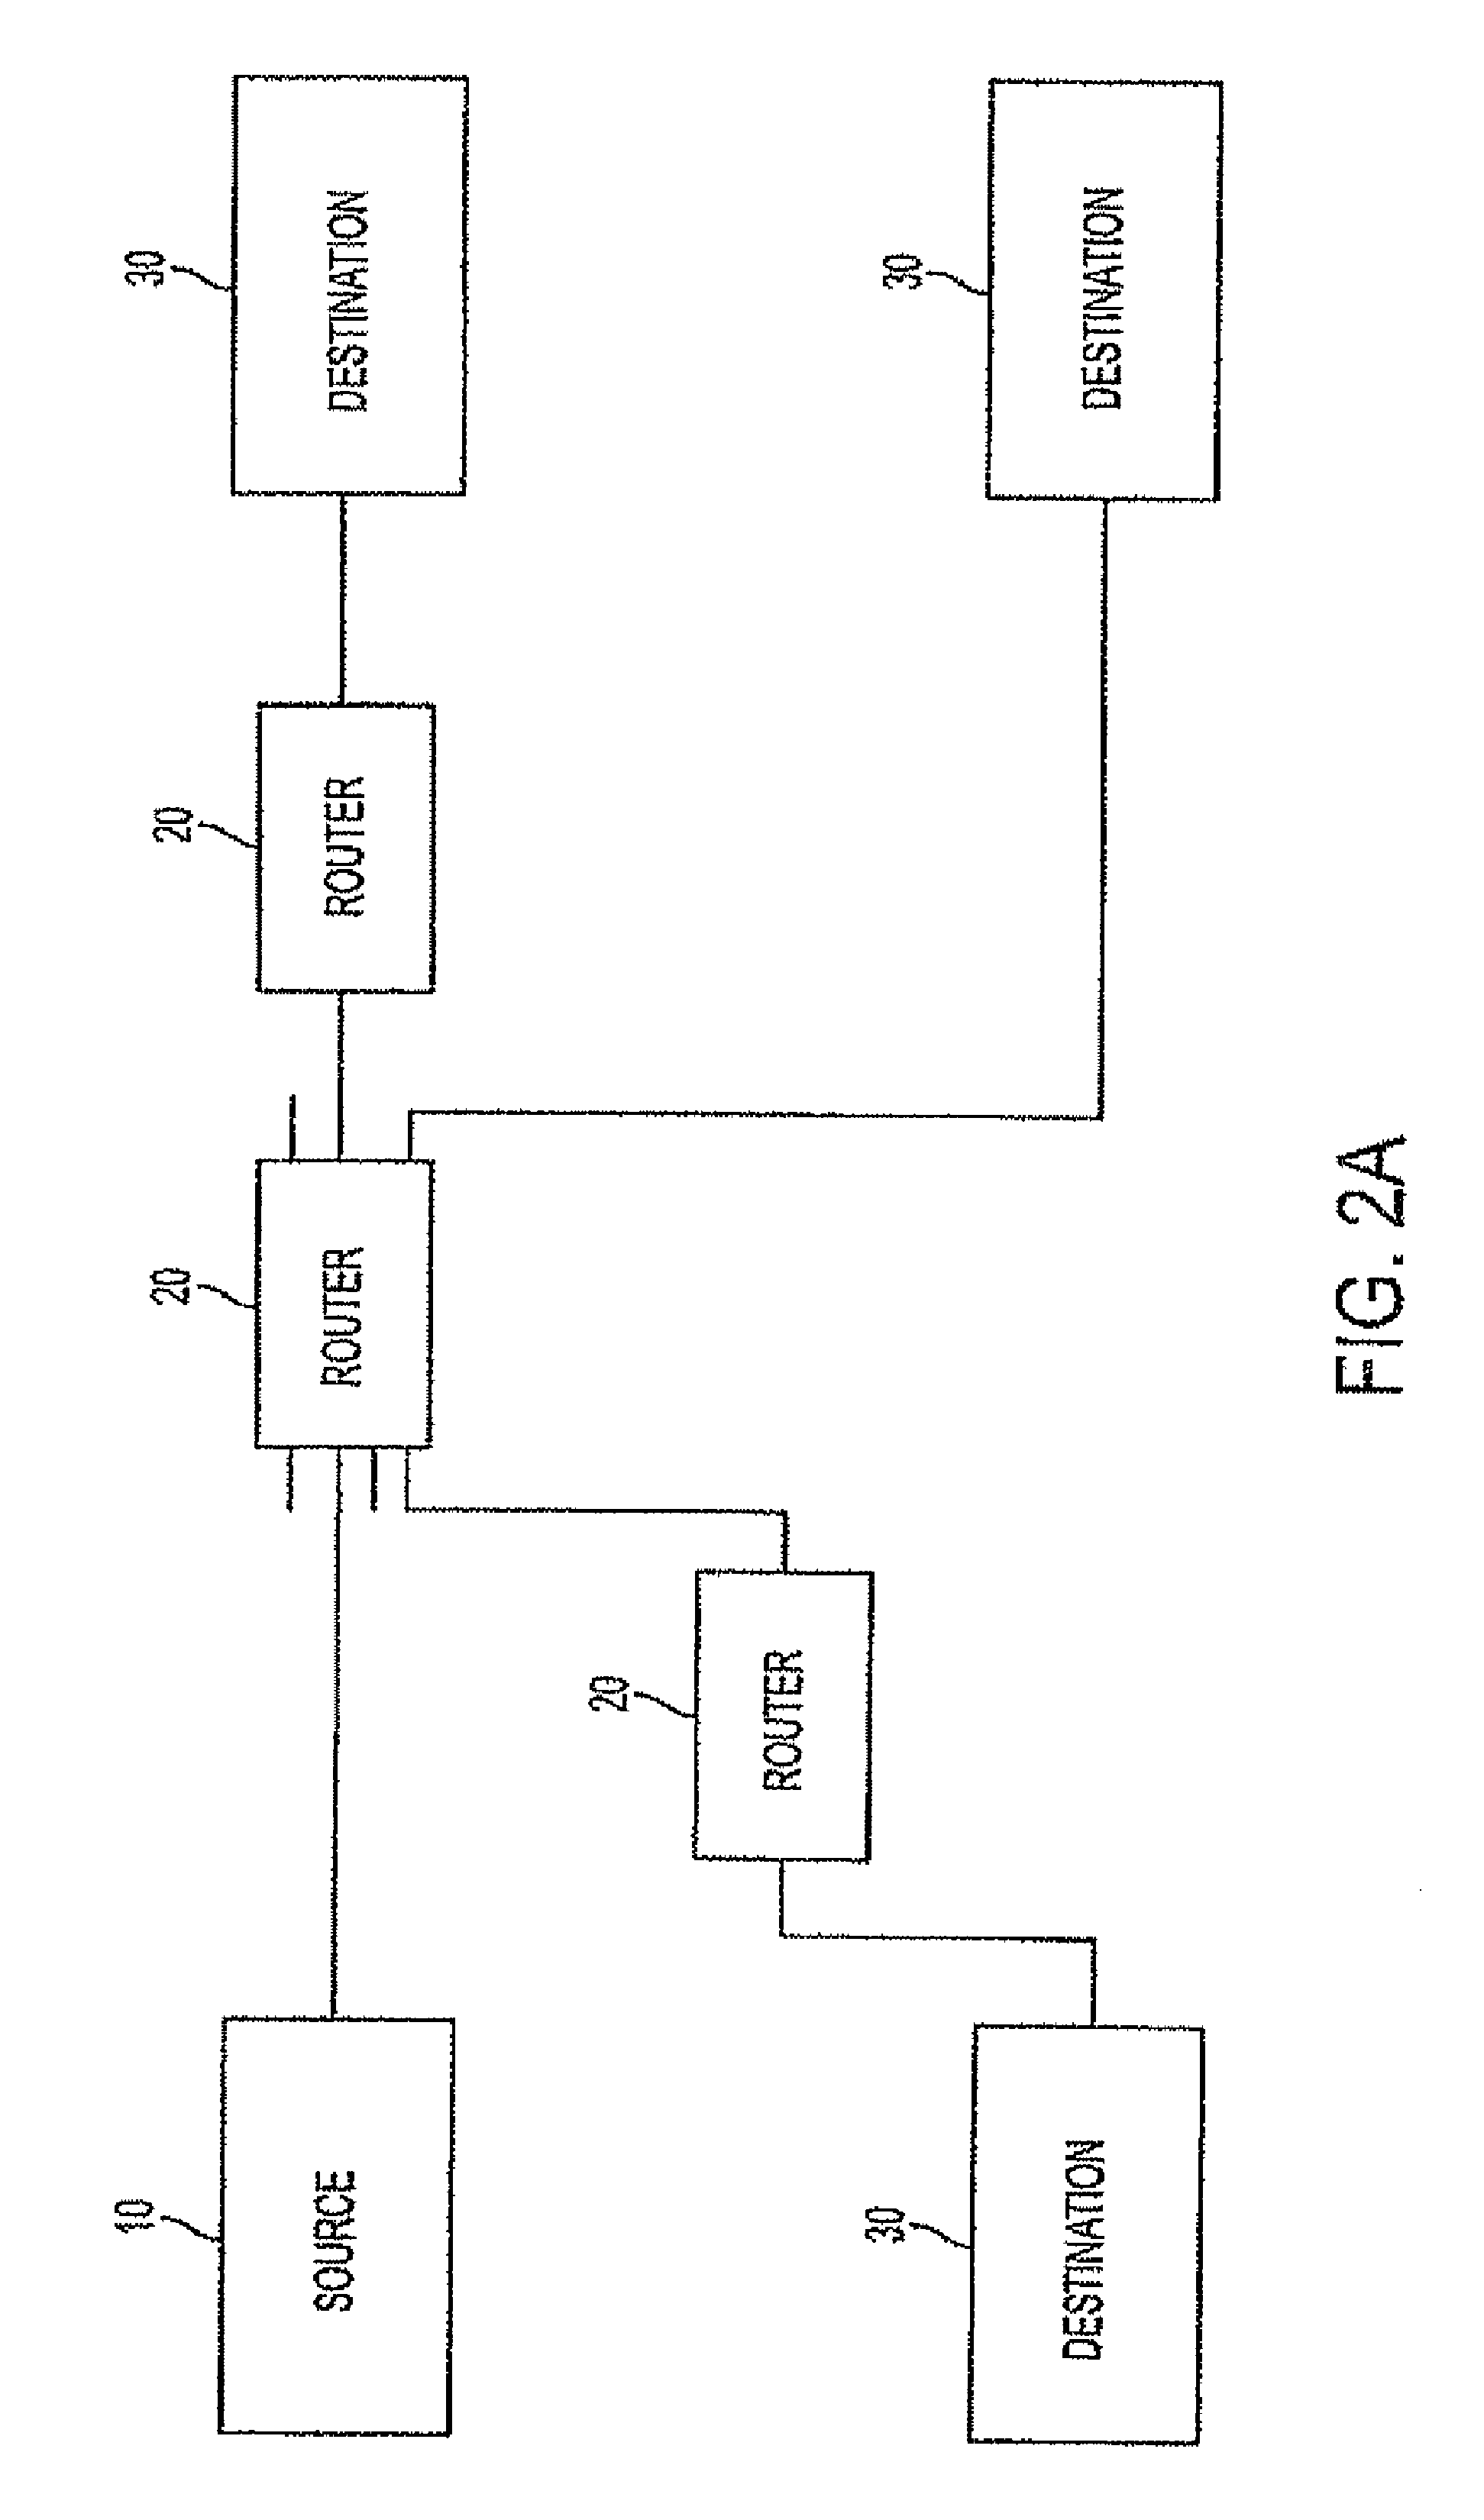 Filtering and route lookup in a switching device